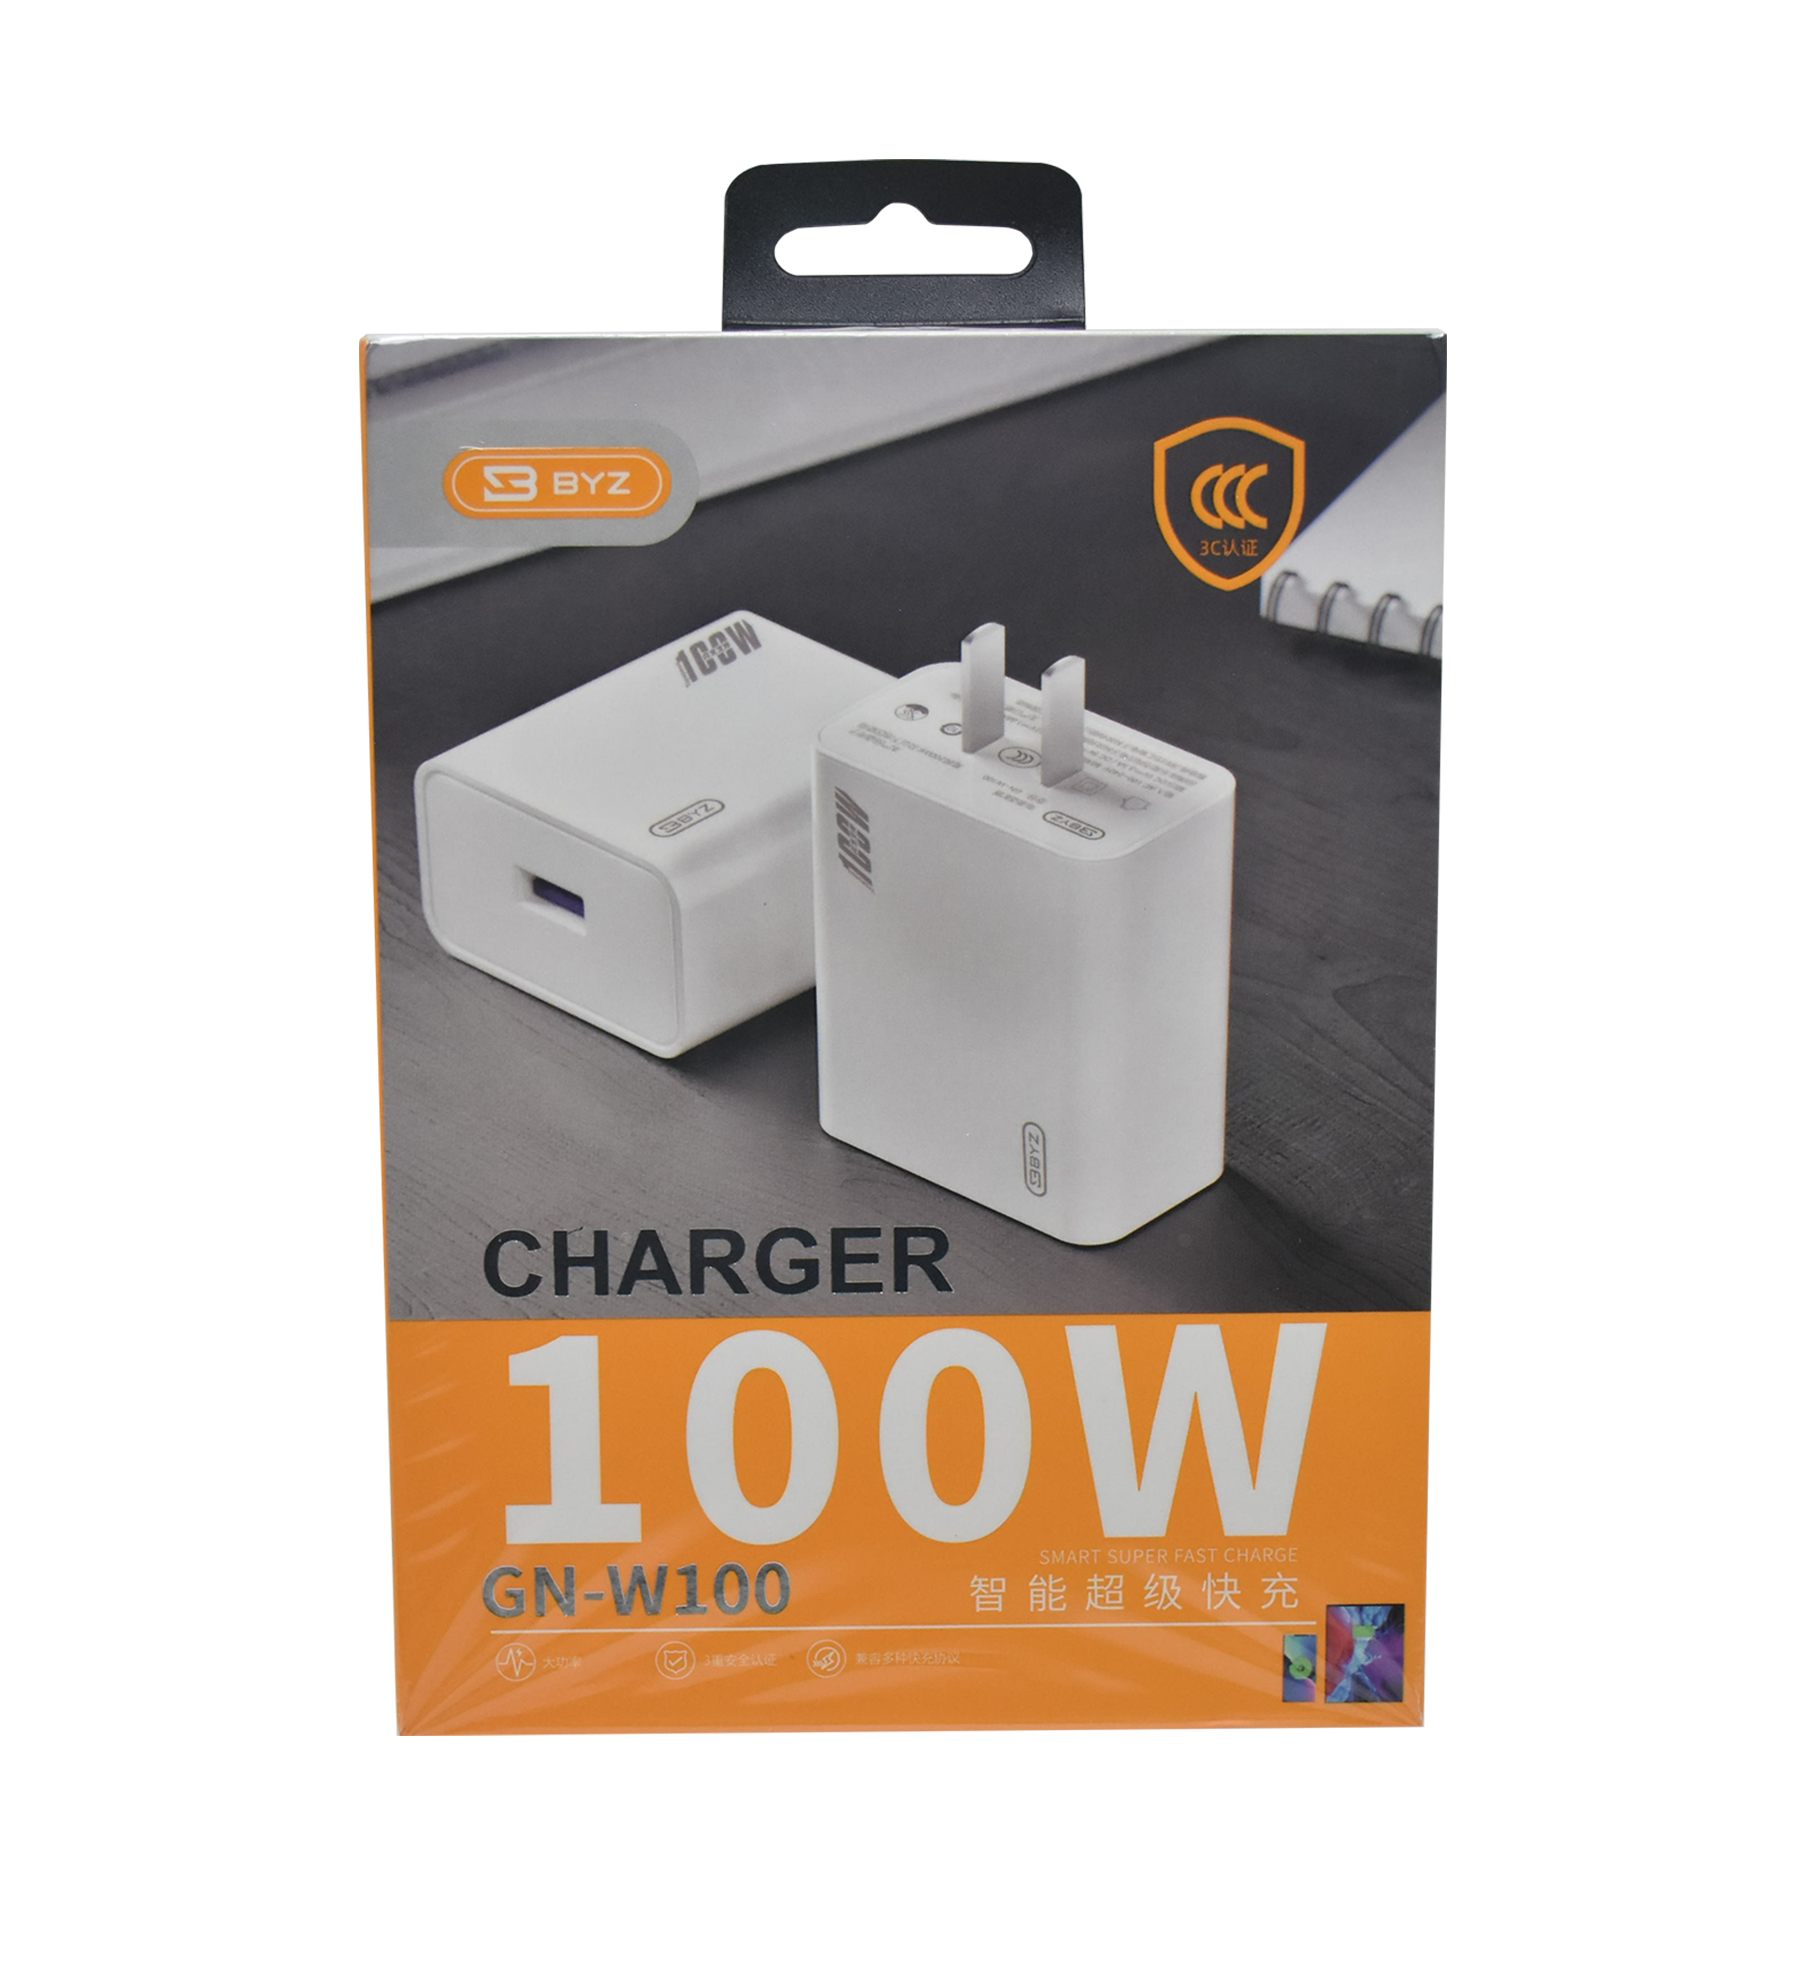 BYZ GN-W100 Charger